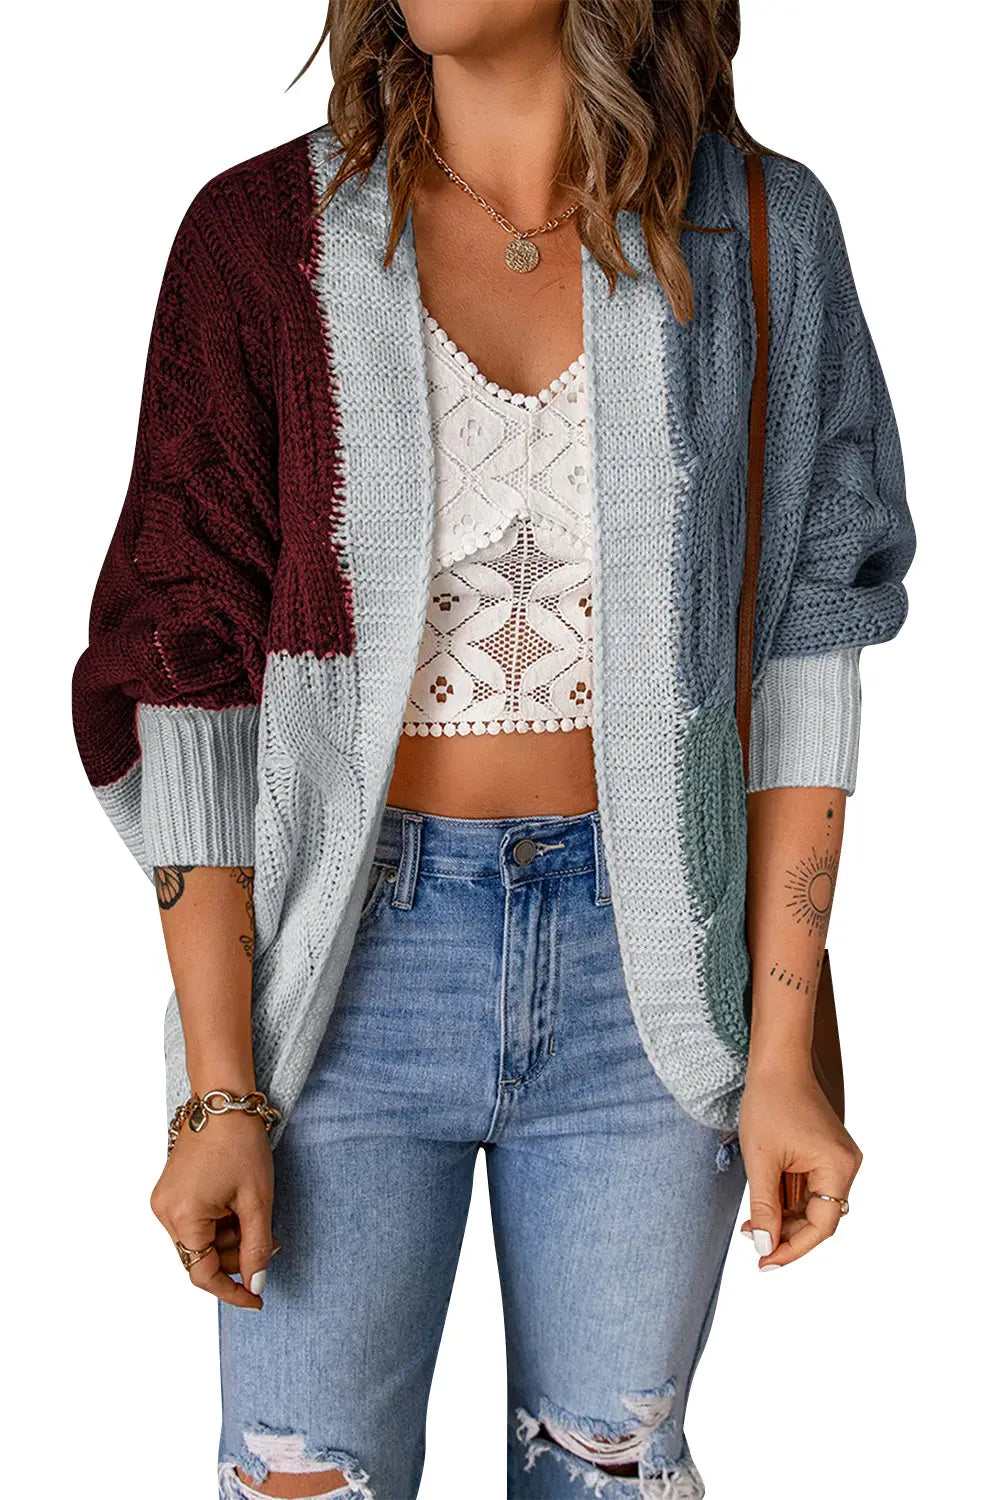 Brown color block loose open front knitted cardigan - 2xl / 100% acrylic - sweaters & cardigans